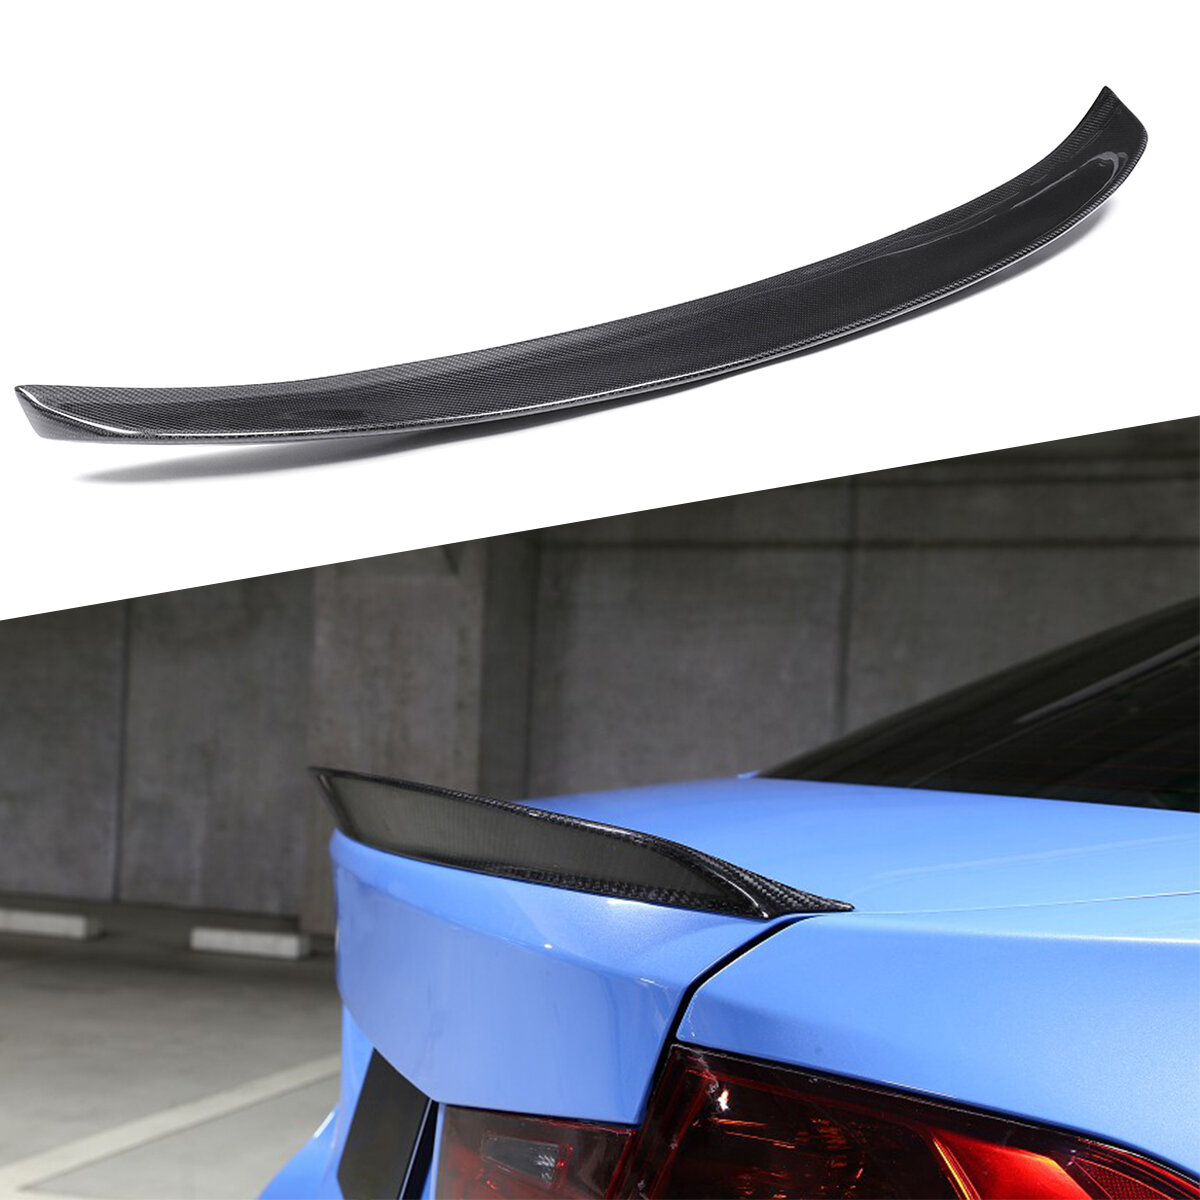 

3D Style Full Real Carbon Fiber Rear Trunk Spoiler Wing For BMW F30 F80 2012-2019 320i 325i 328i